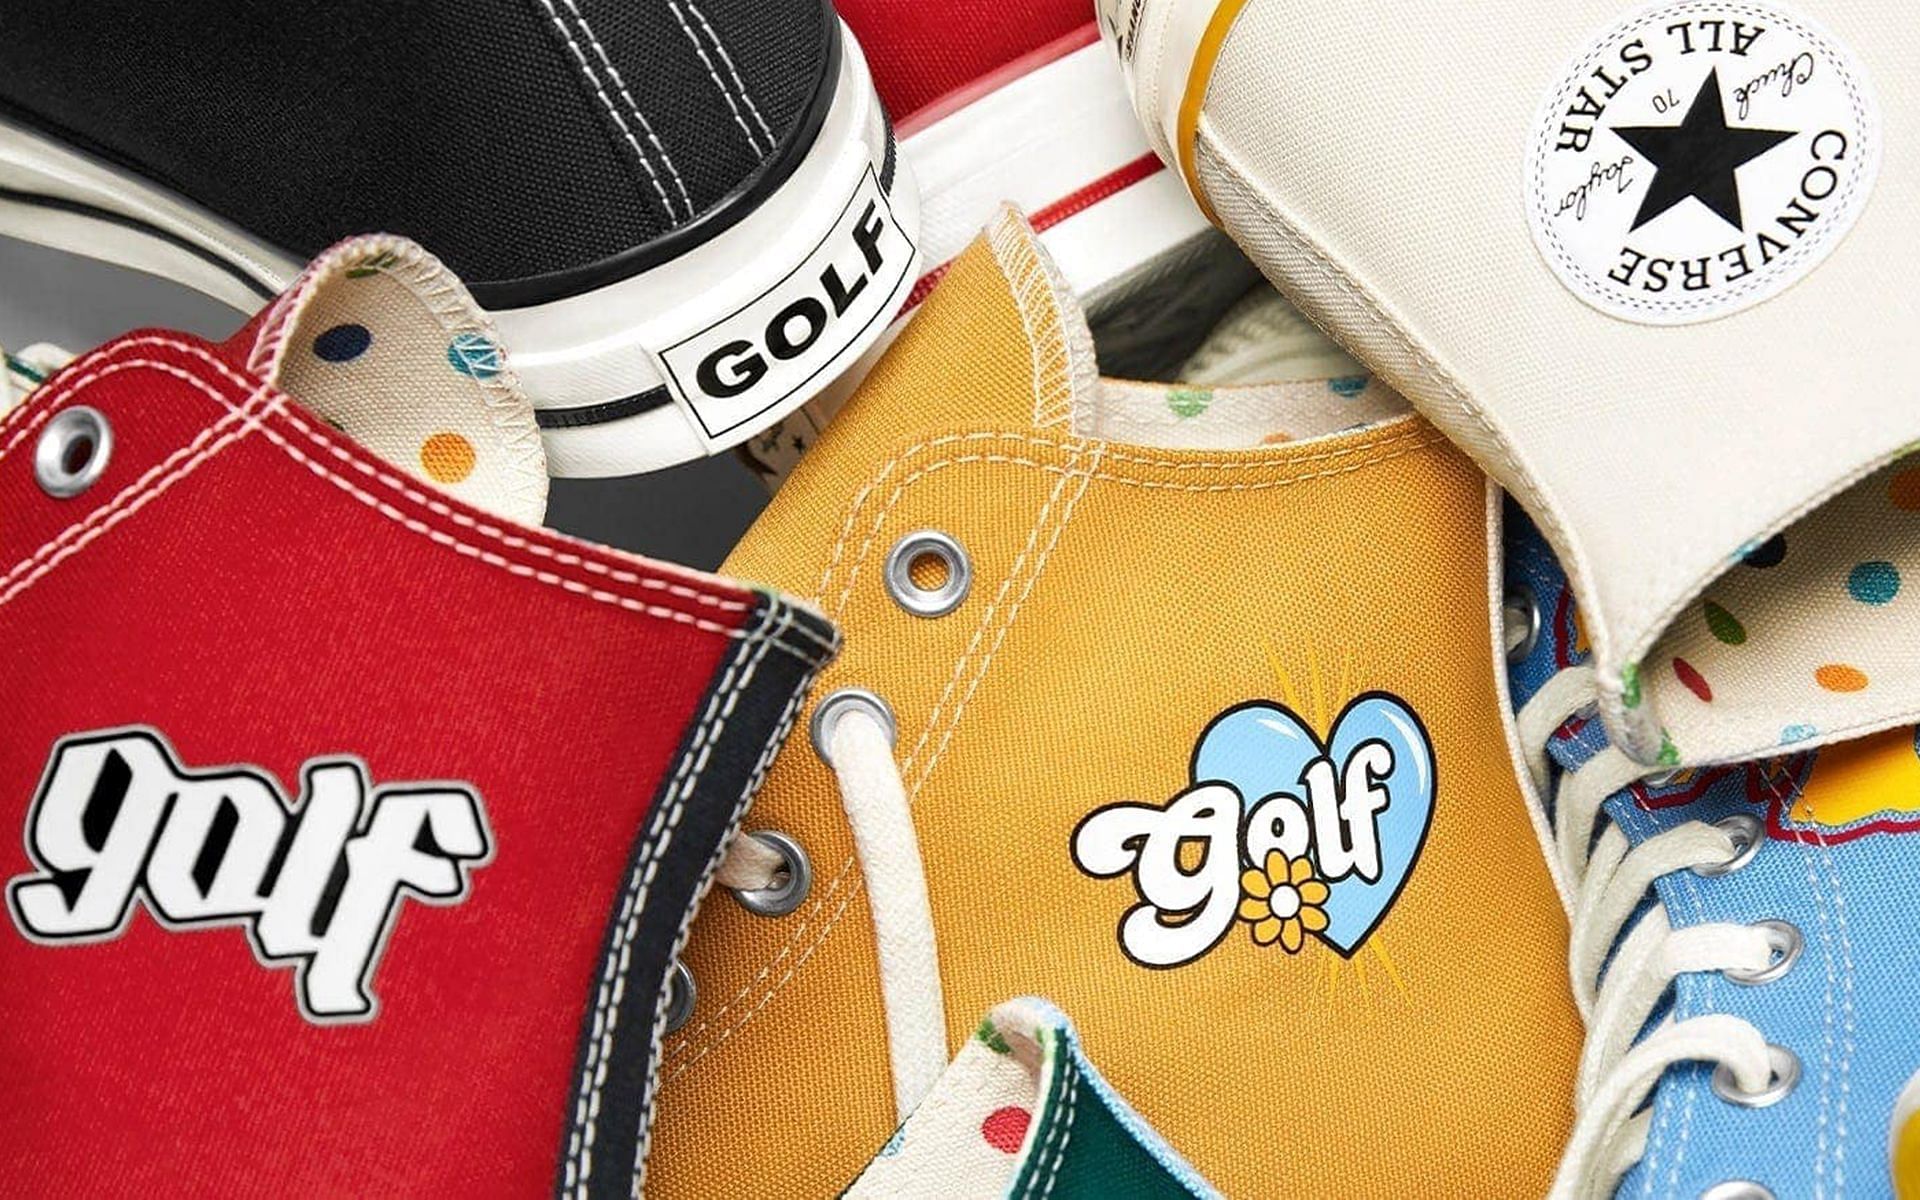 Converse X Golf Wang collab: Release date, price, and more about 